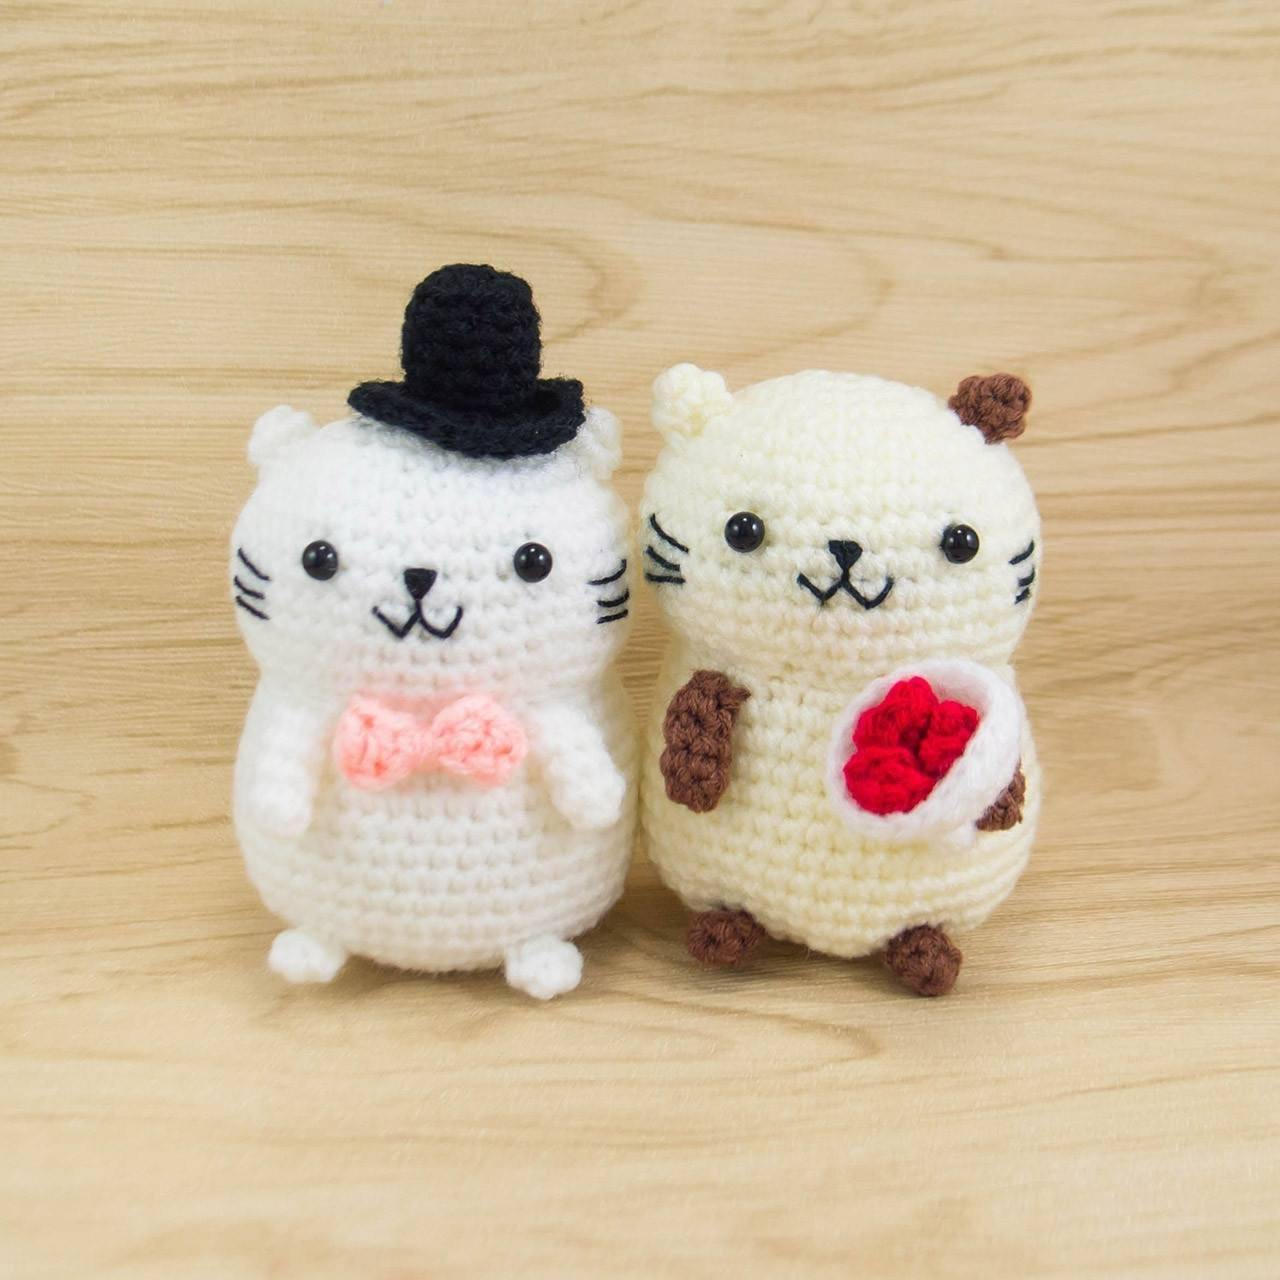 Crochet Stuffed Animals Pattern - Couple Cat for Valentine's Day 